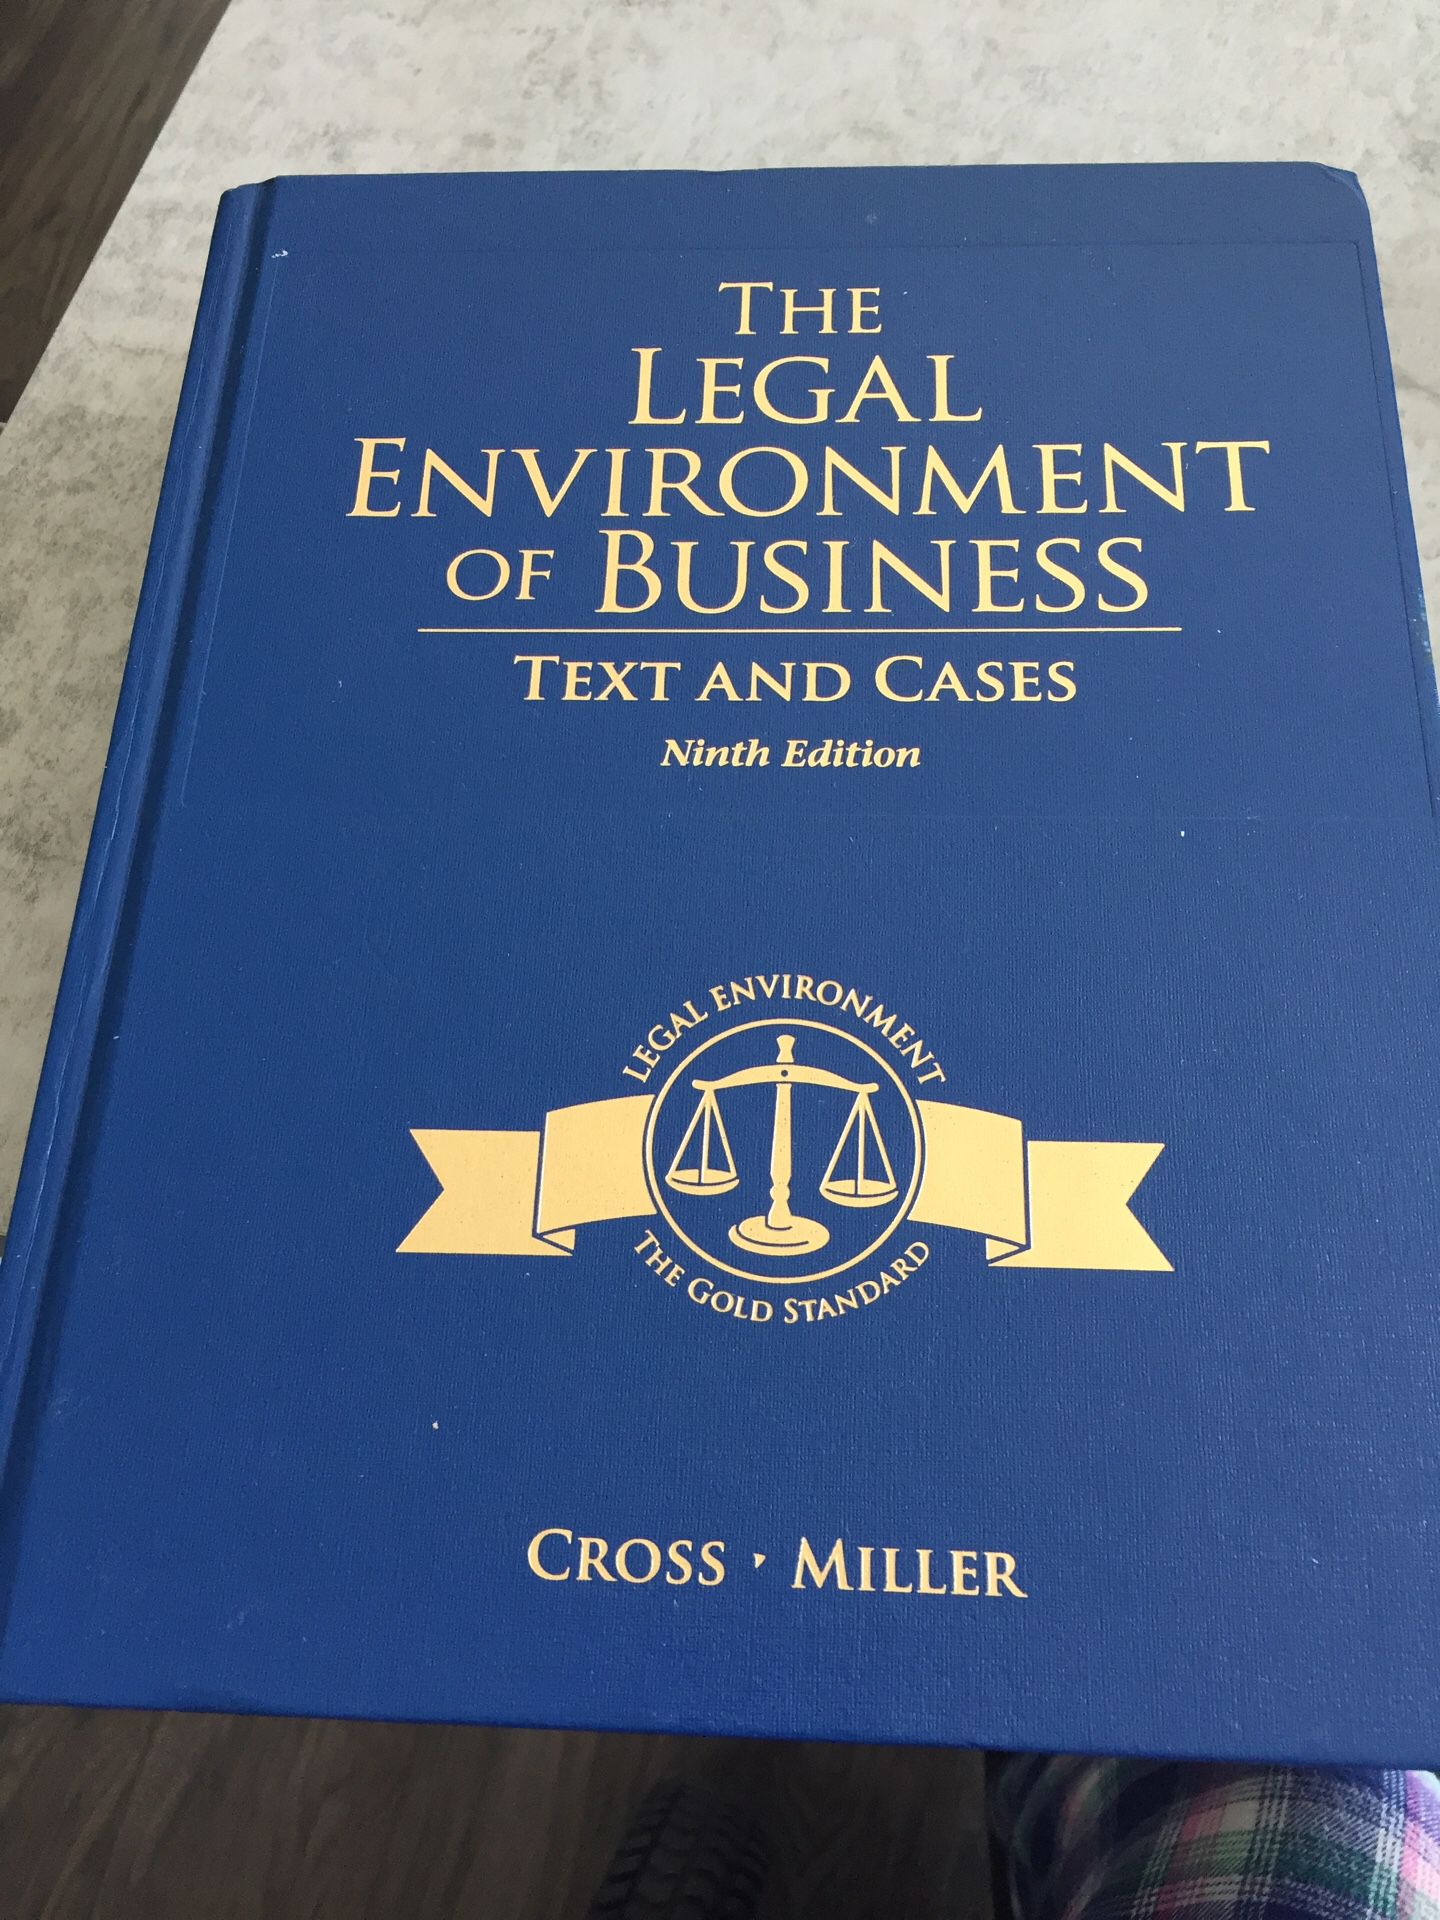 The Legal Environment of Business-Text and Cases